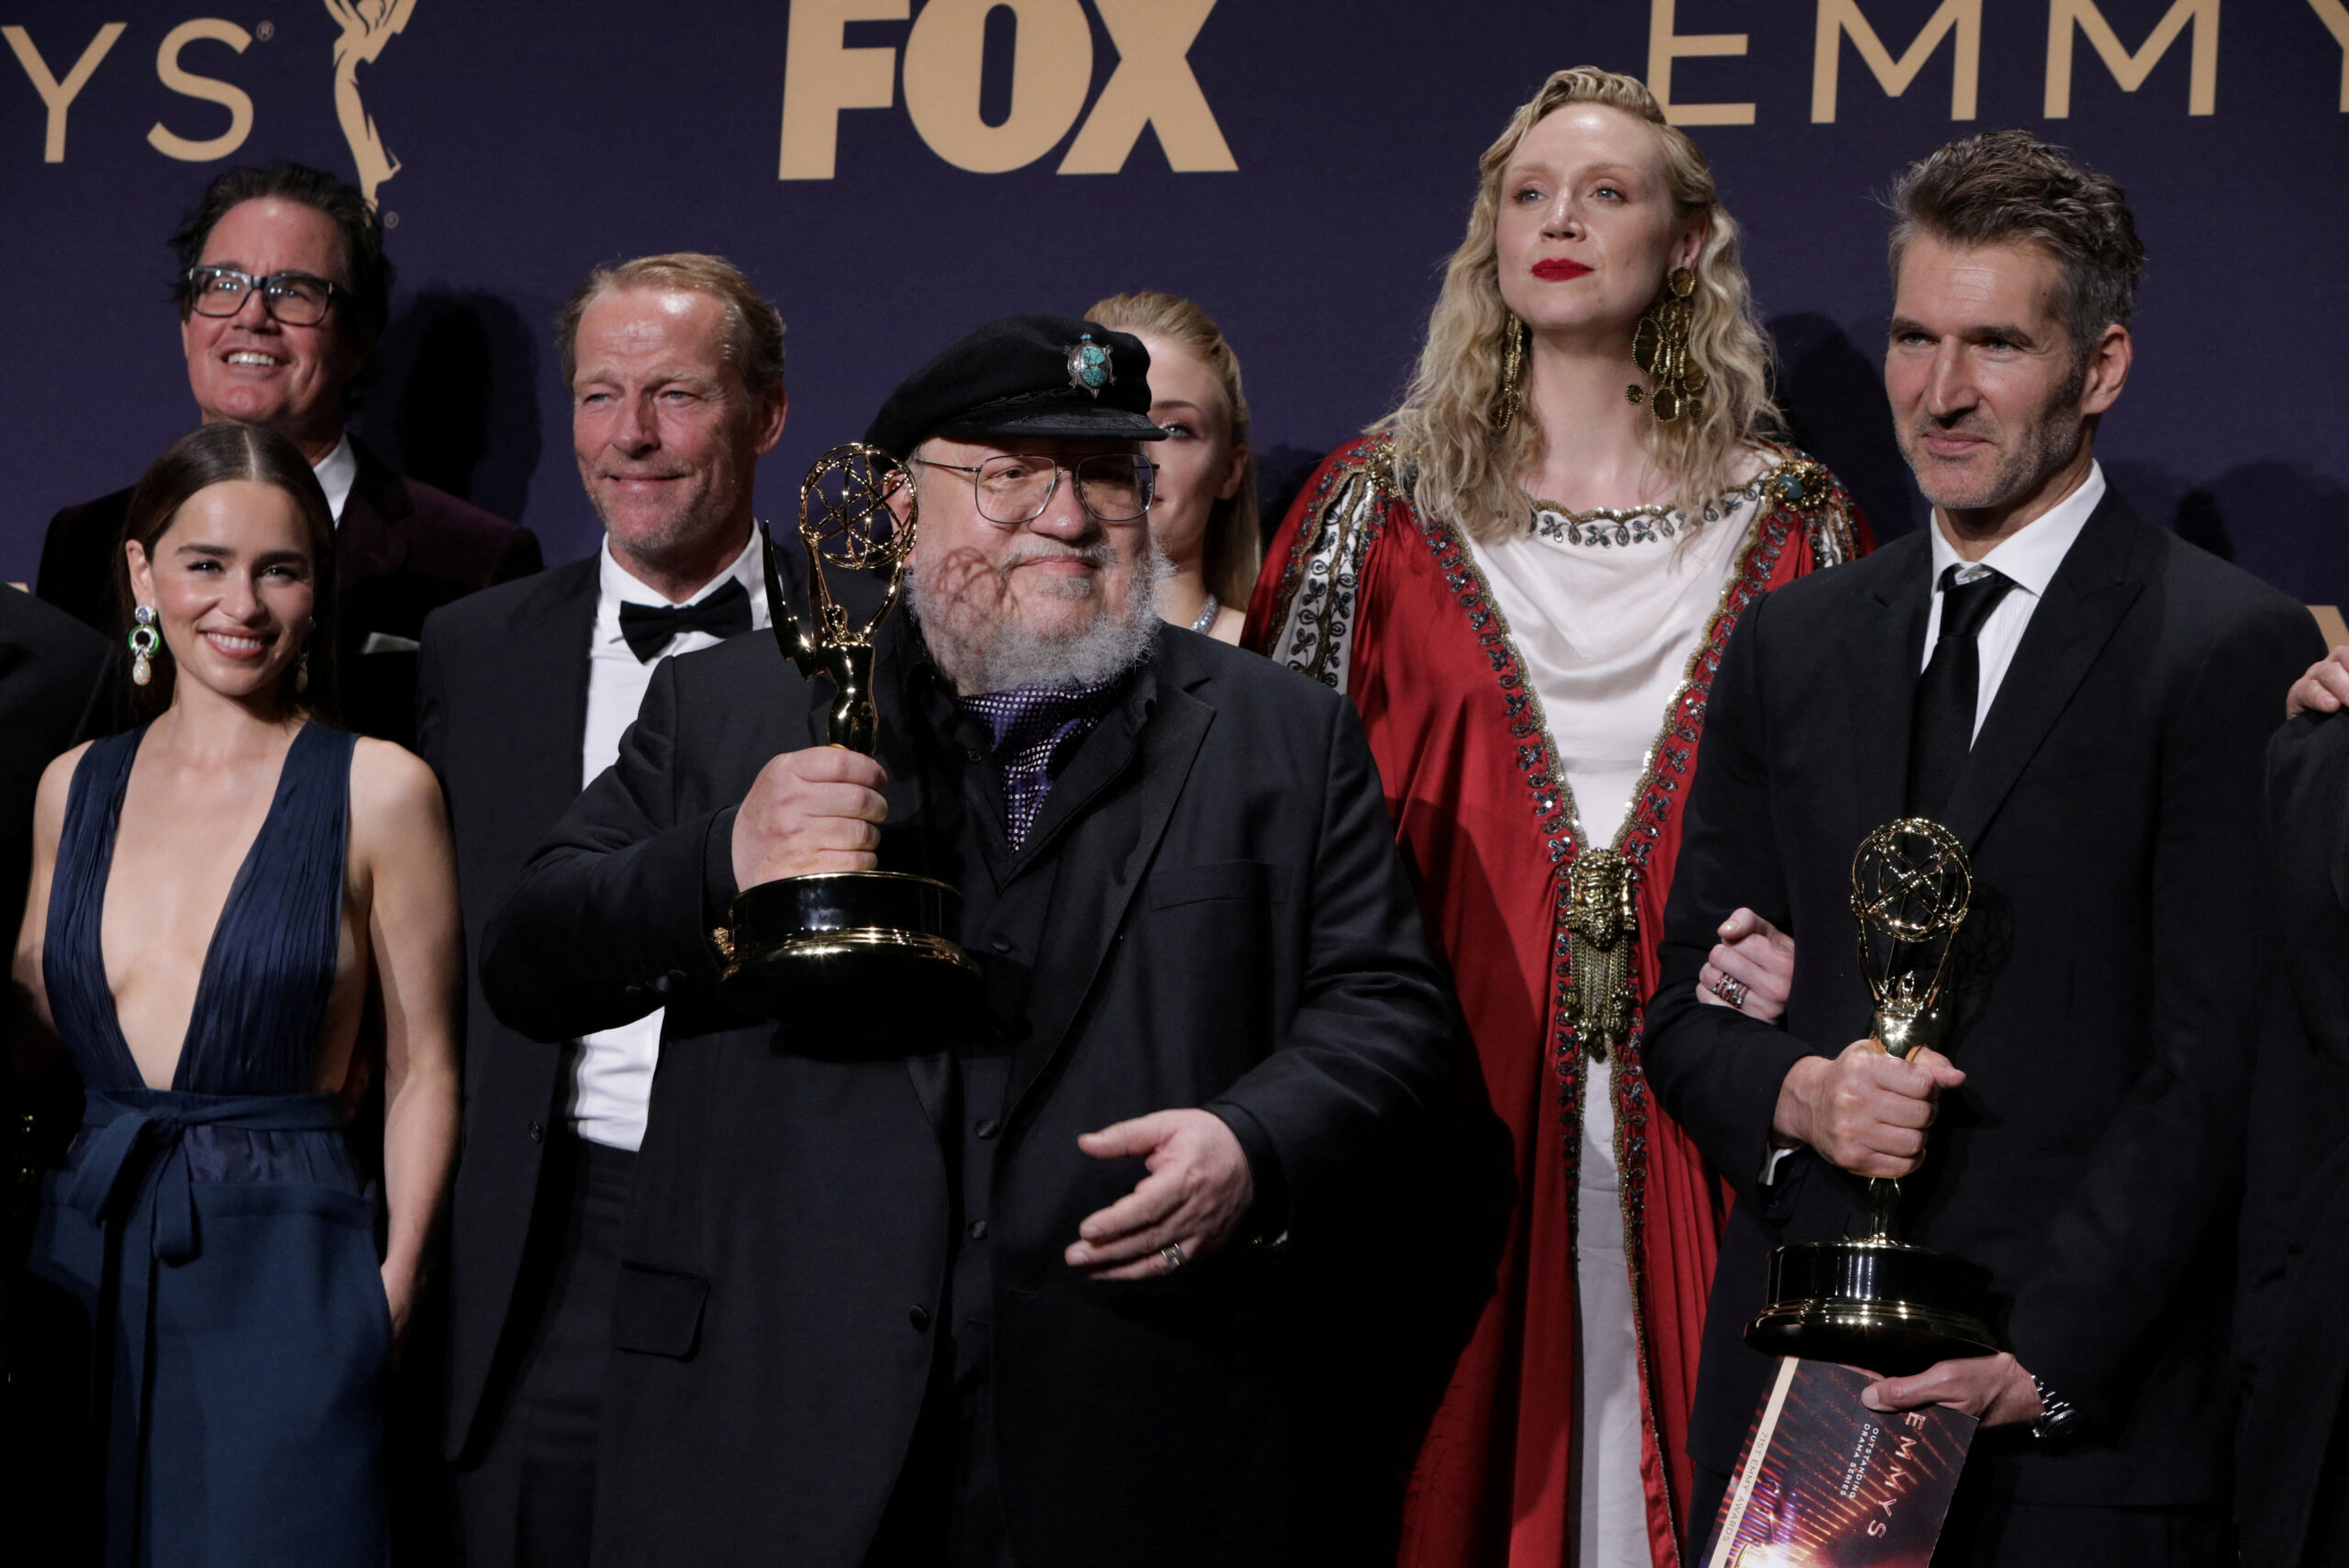 FILE PHOTO: 71st Primetime Emmy Awards - Photo Room – Los Angeles, California, U.S., September 22, 2019 - George R.R. Martin (C) and the cast and crew of Game of Thrones poses backstage with their award for Outstanding Drama Series. REUTERS/Monica Almeida/File Photo